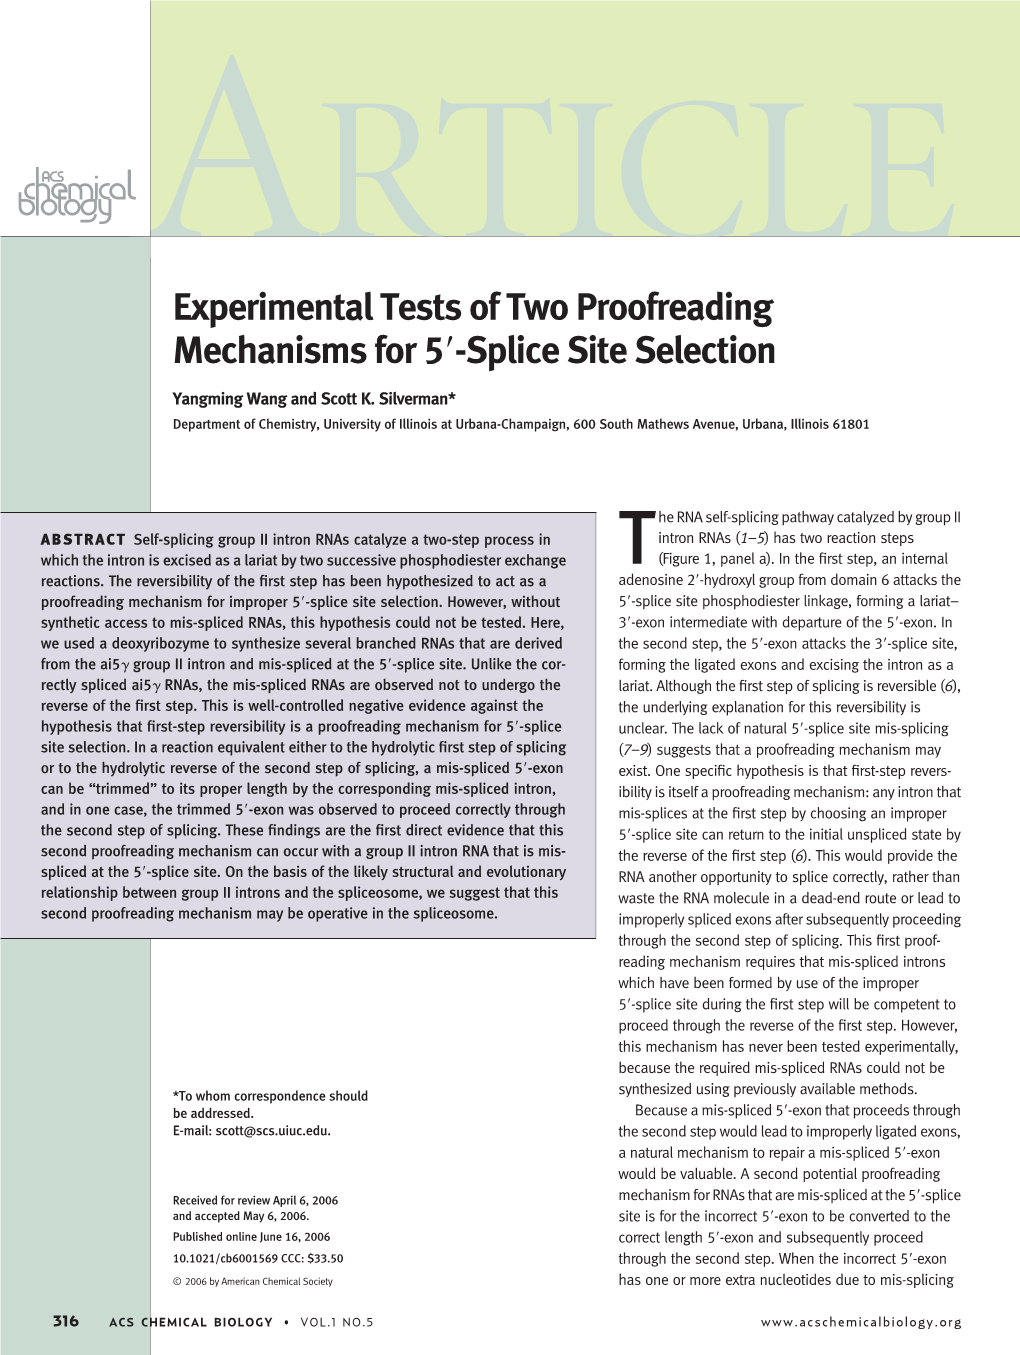 Experimental Tests of Two Proofreading Mechanisms for 5=-Splice Site Selection